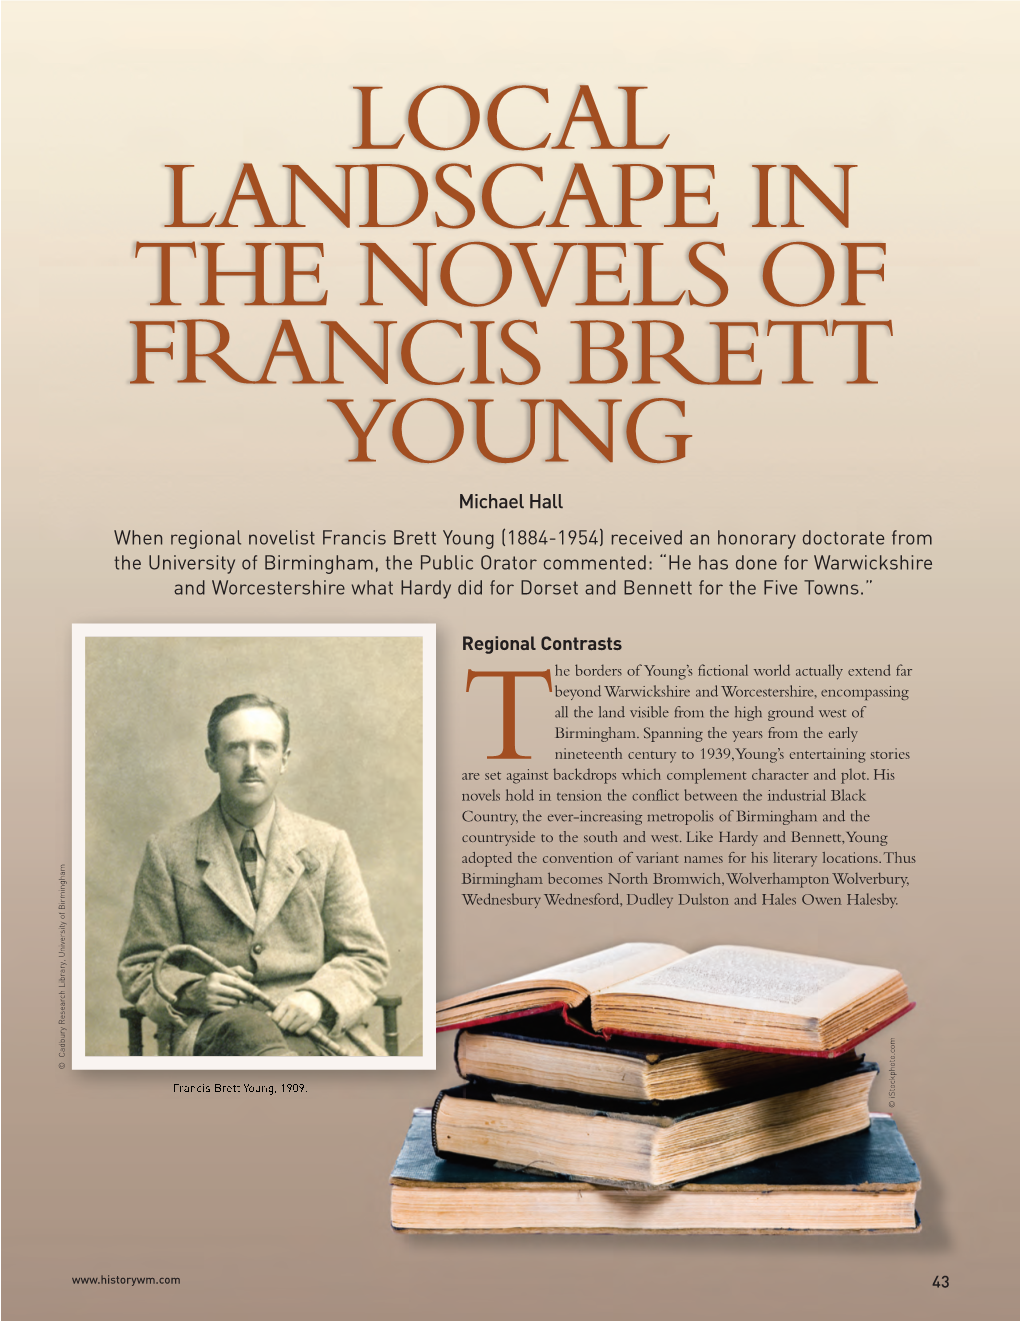 Local Landscape in the Novels of Francis Brett Young